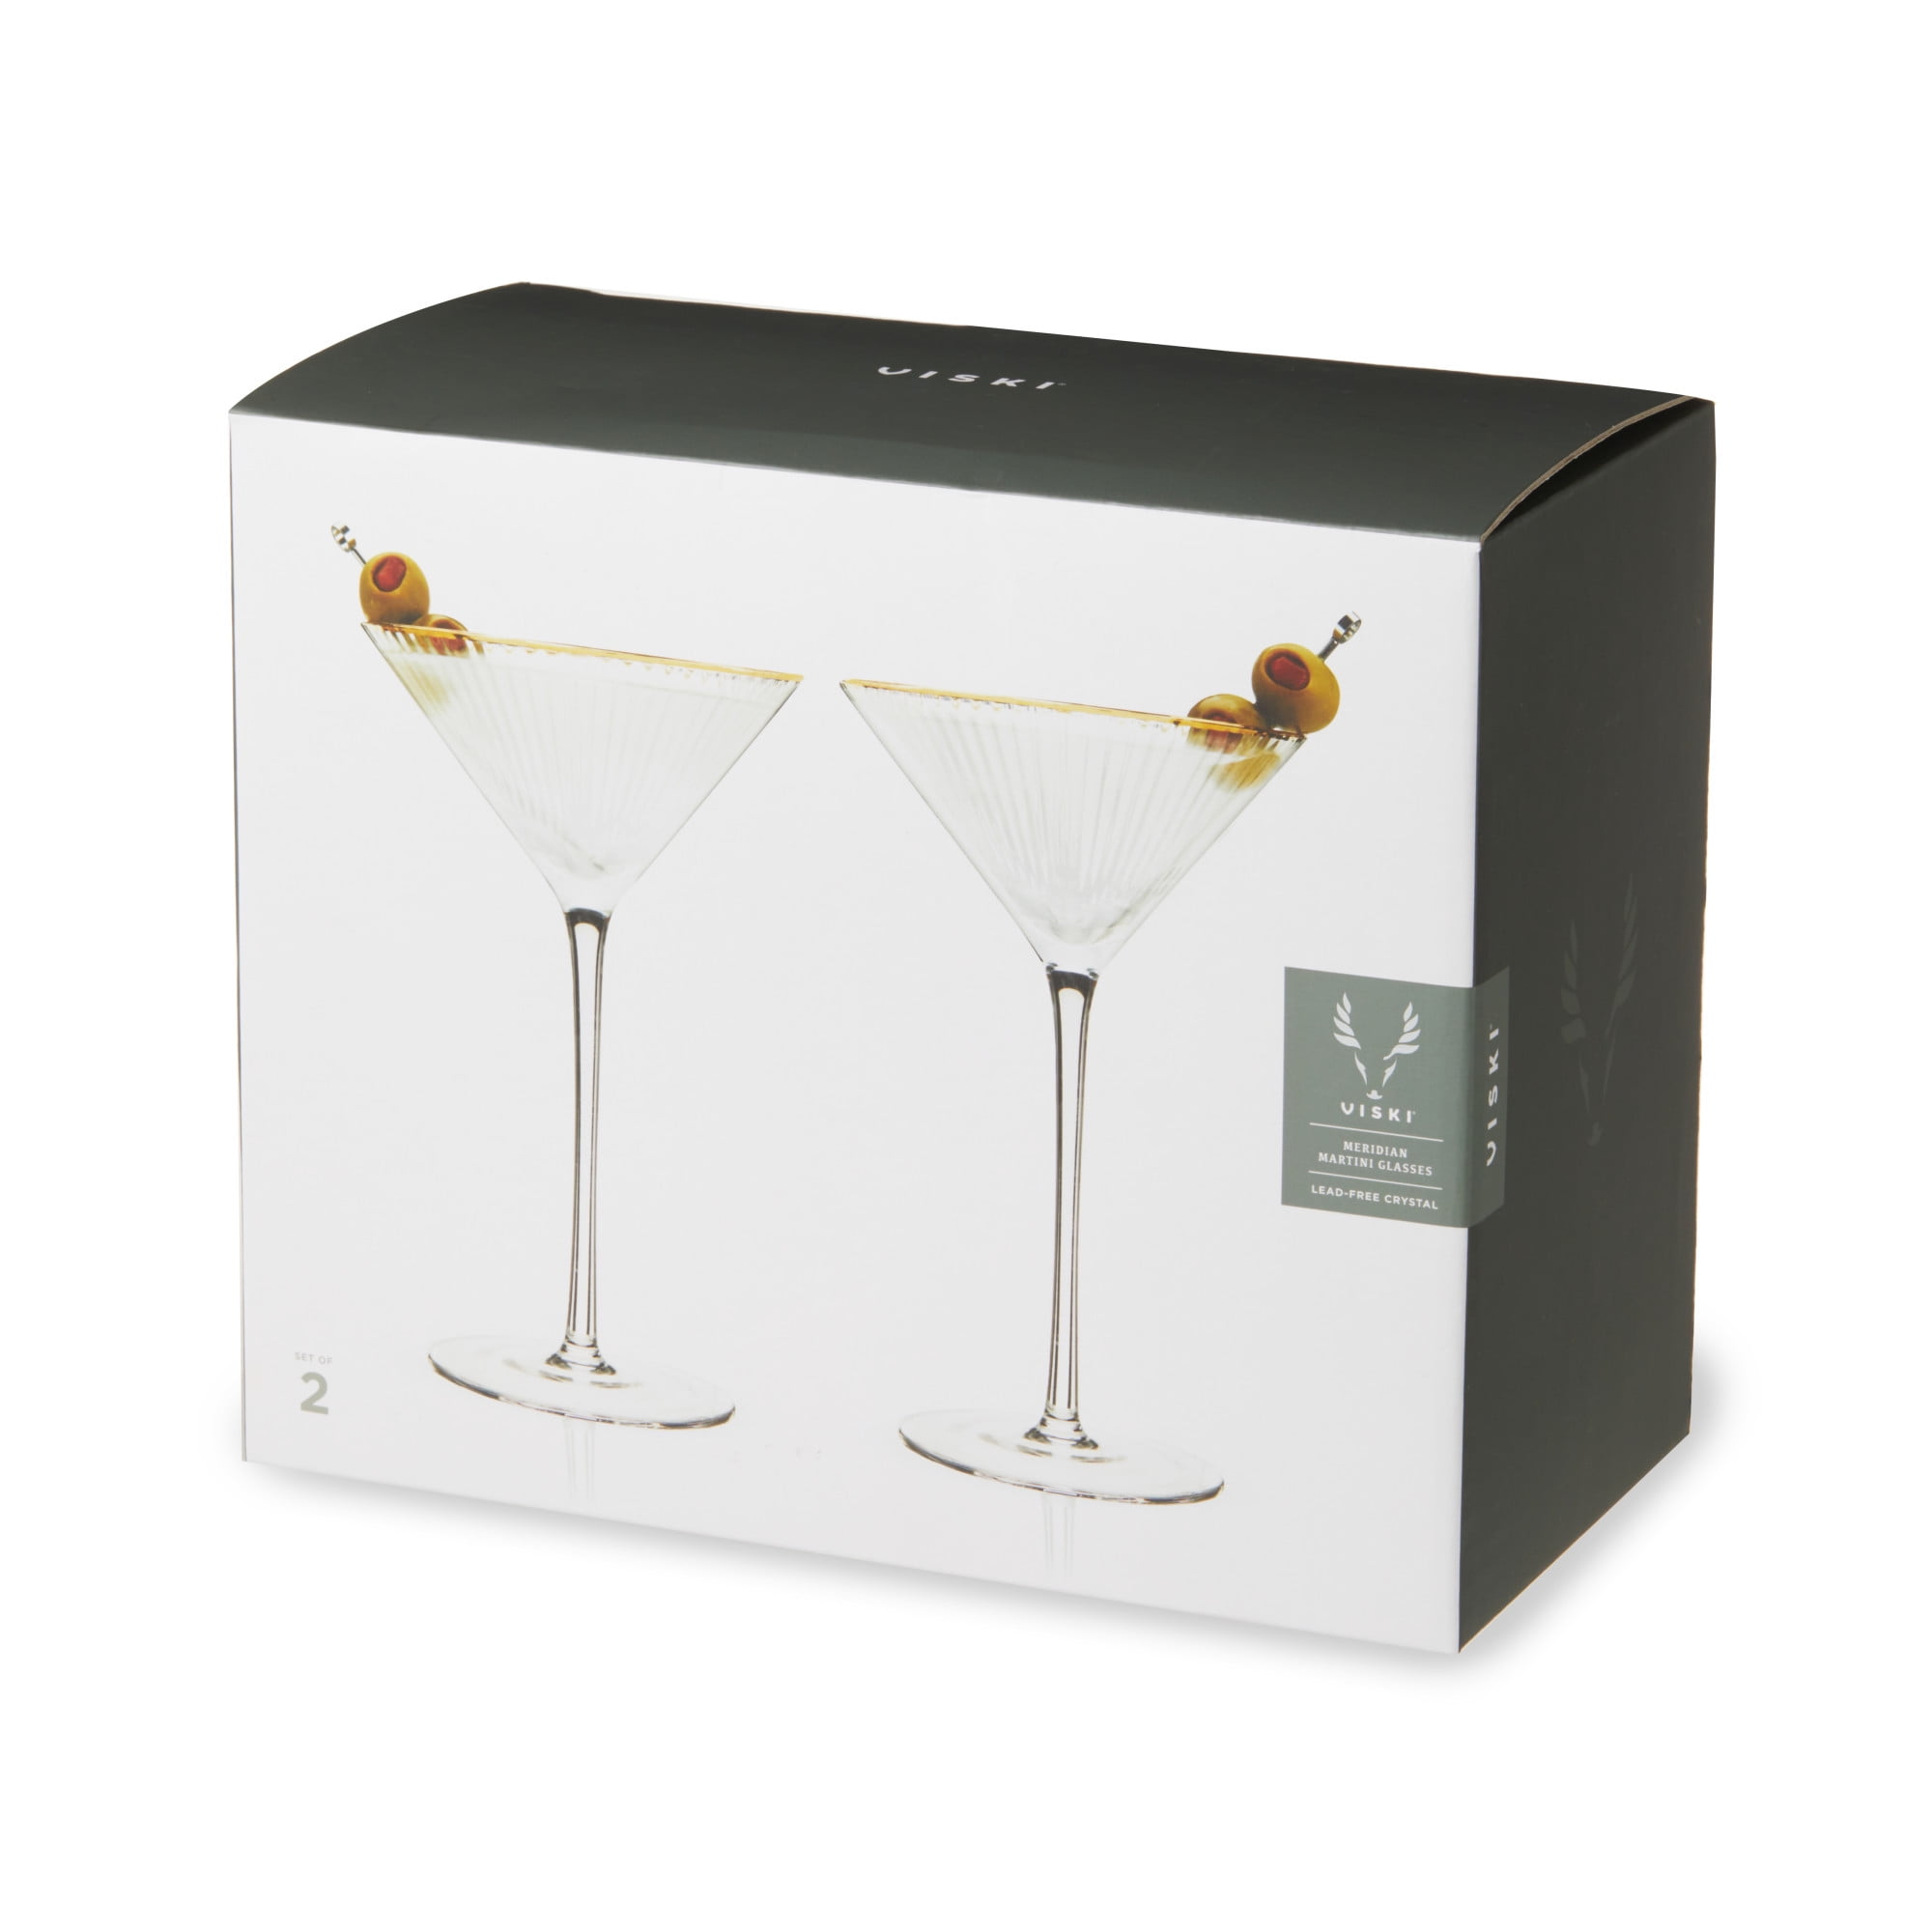 Crystal Martini Glasses With Lens Design, Set of 2